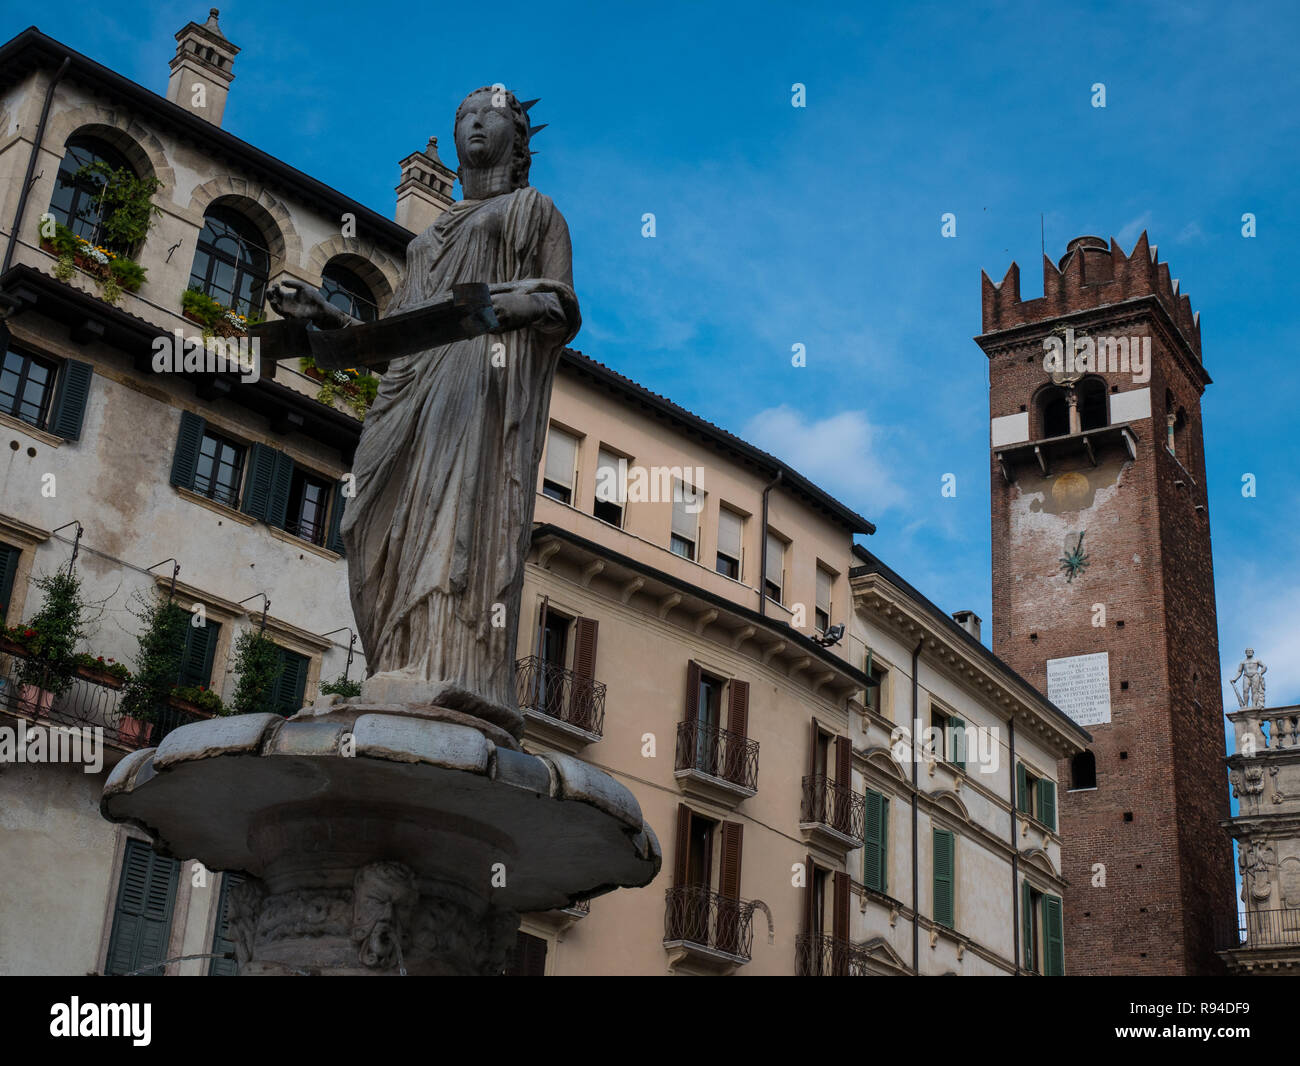 fountain of the Madonna in Piazza delle erbe in Verona, city of love and romance ideal for couples Stock Photo